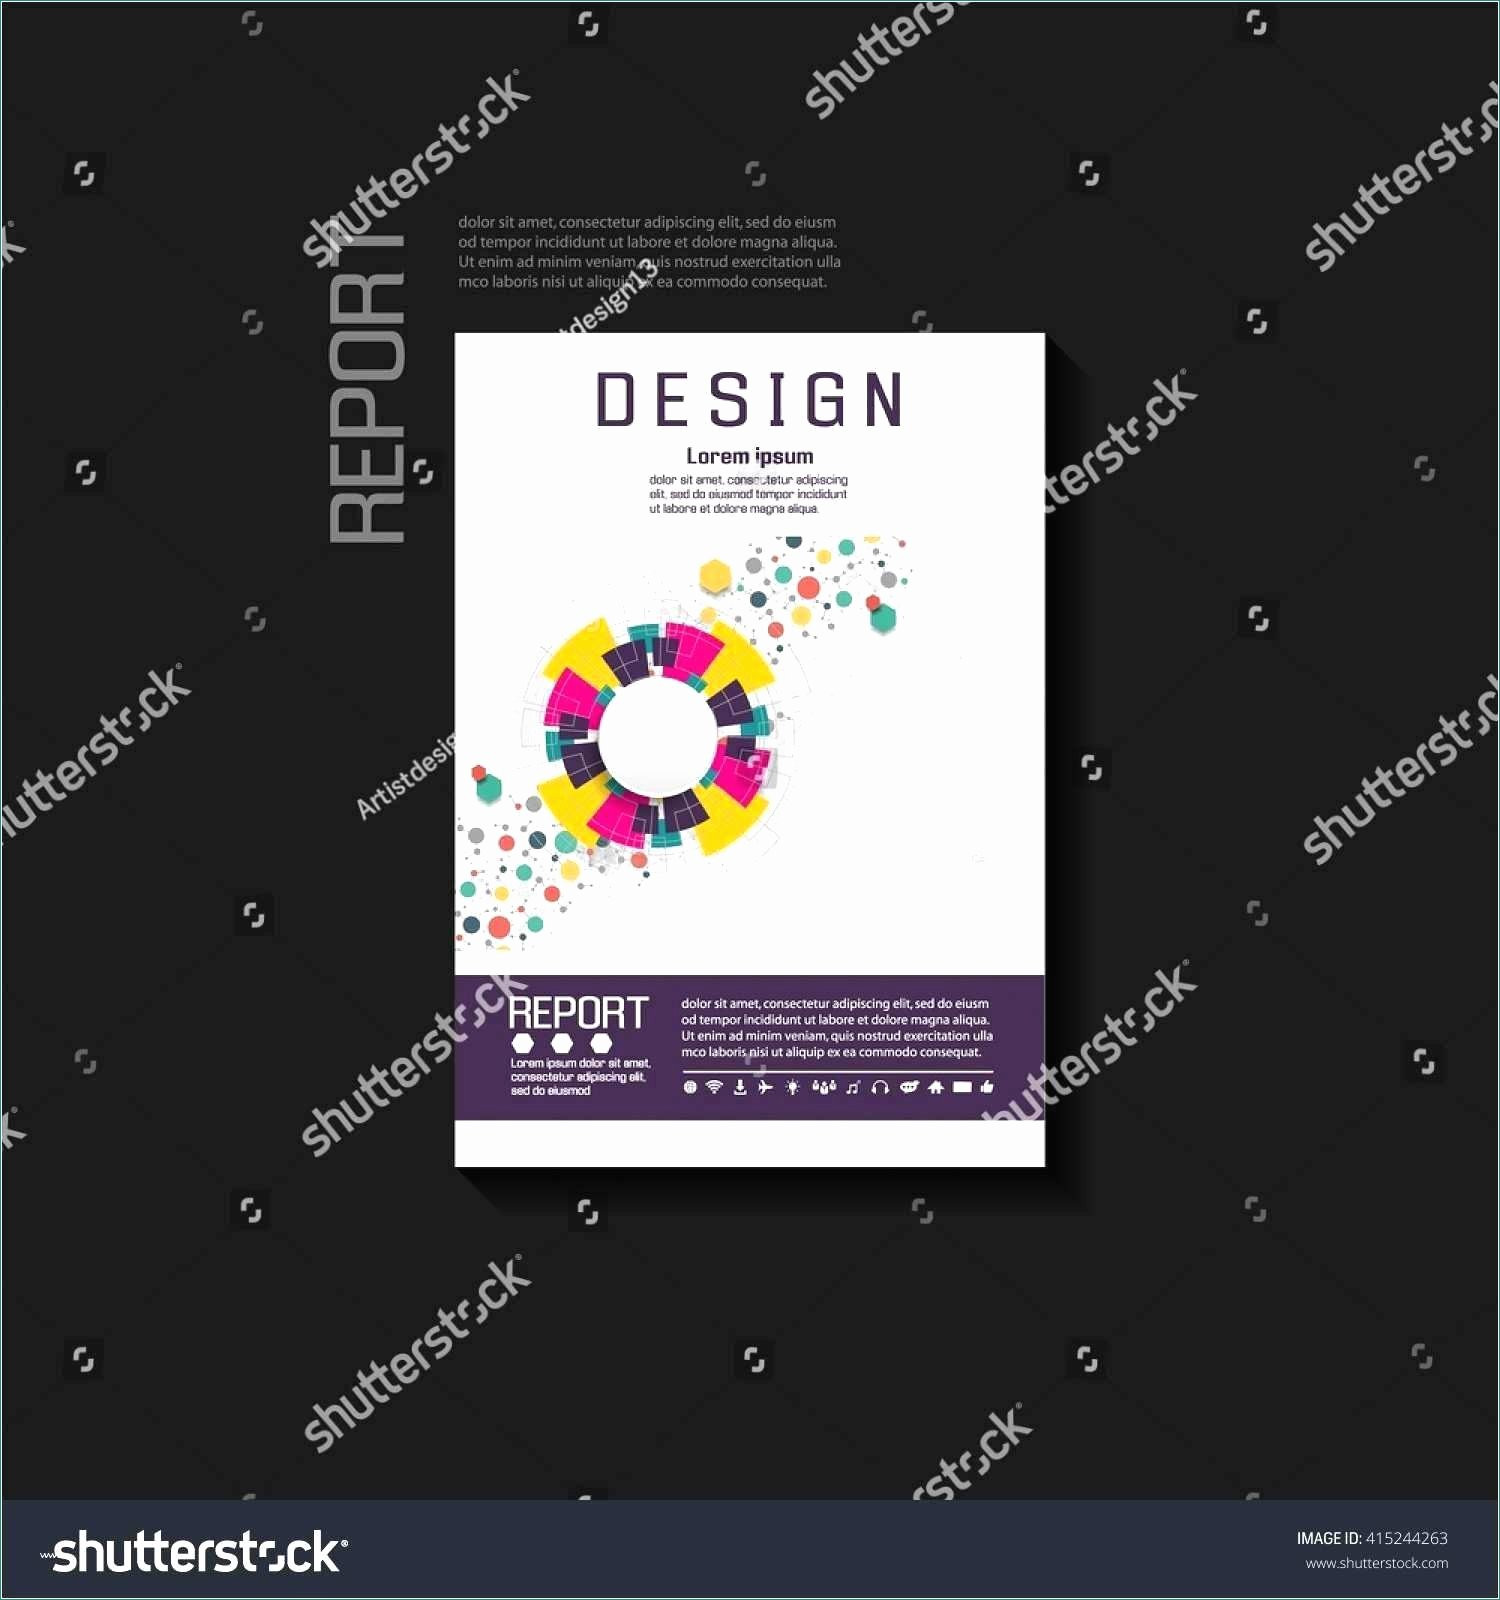 powerpoint flyer templates free blank business card template word valid blank business card template brochure templates free for of blank business card template word